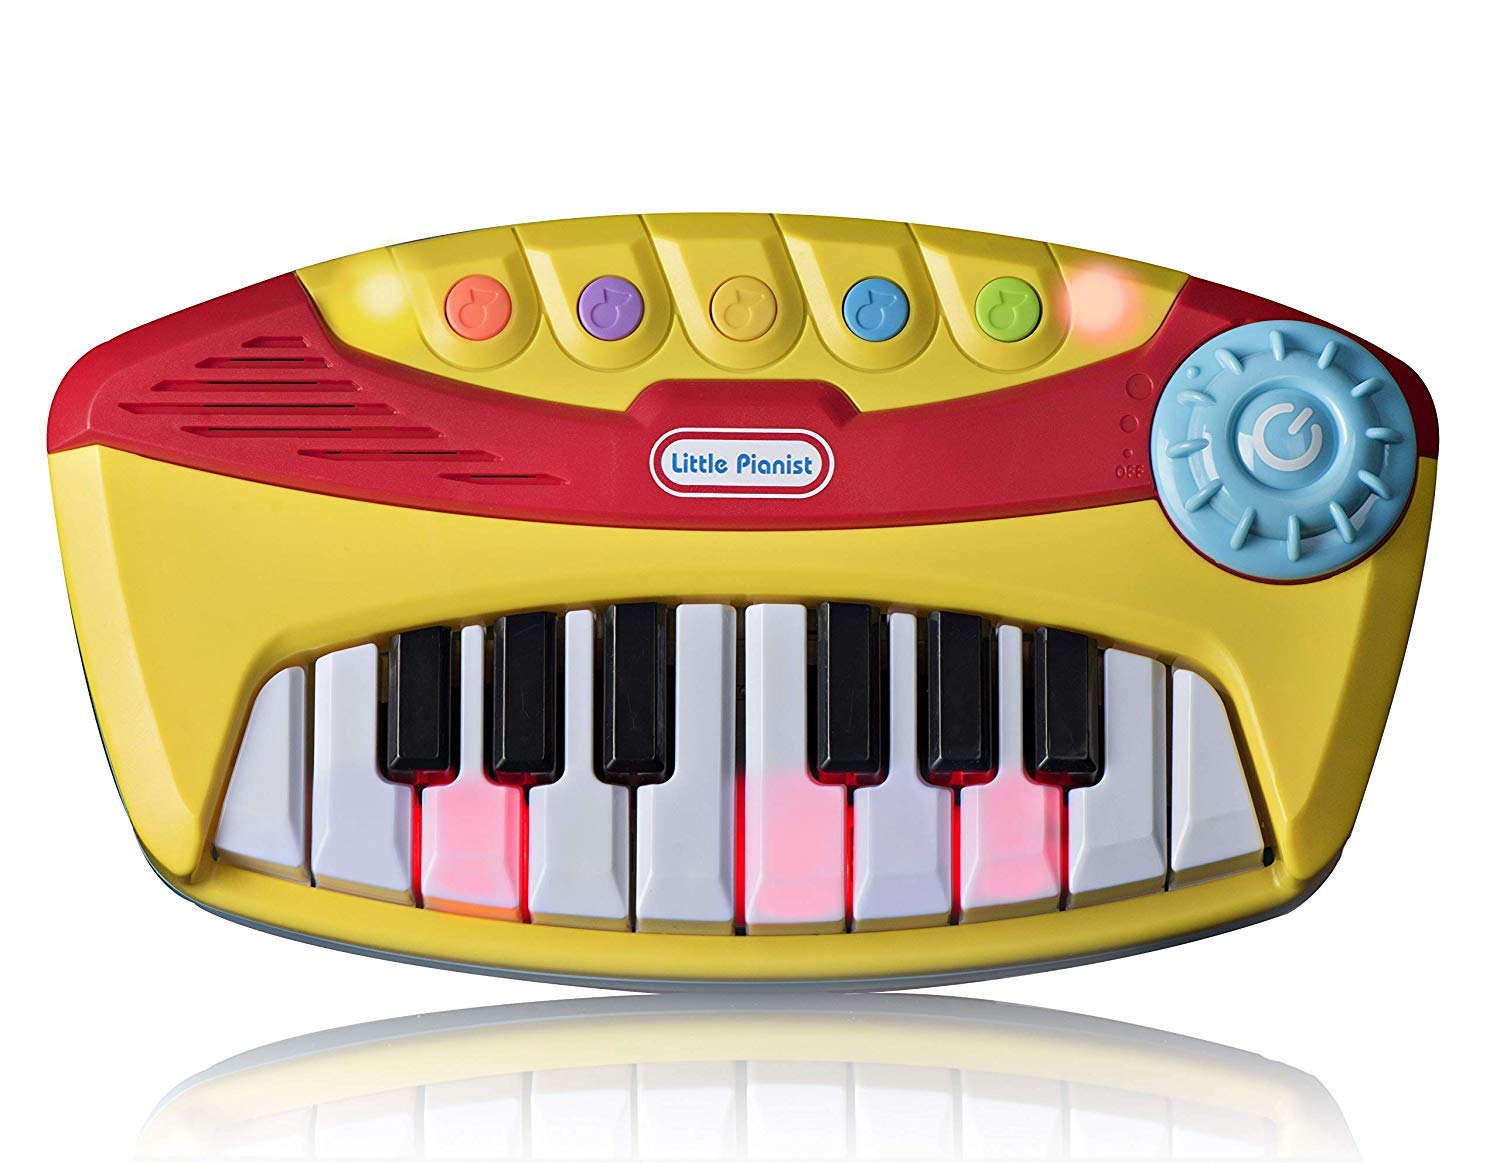 A tiny toy organ for children